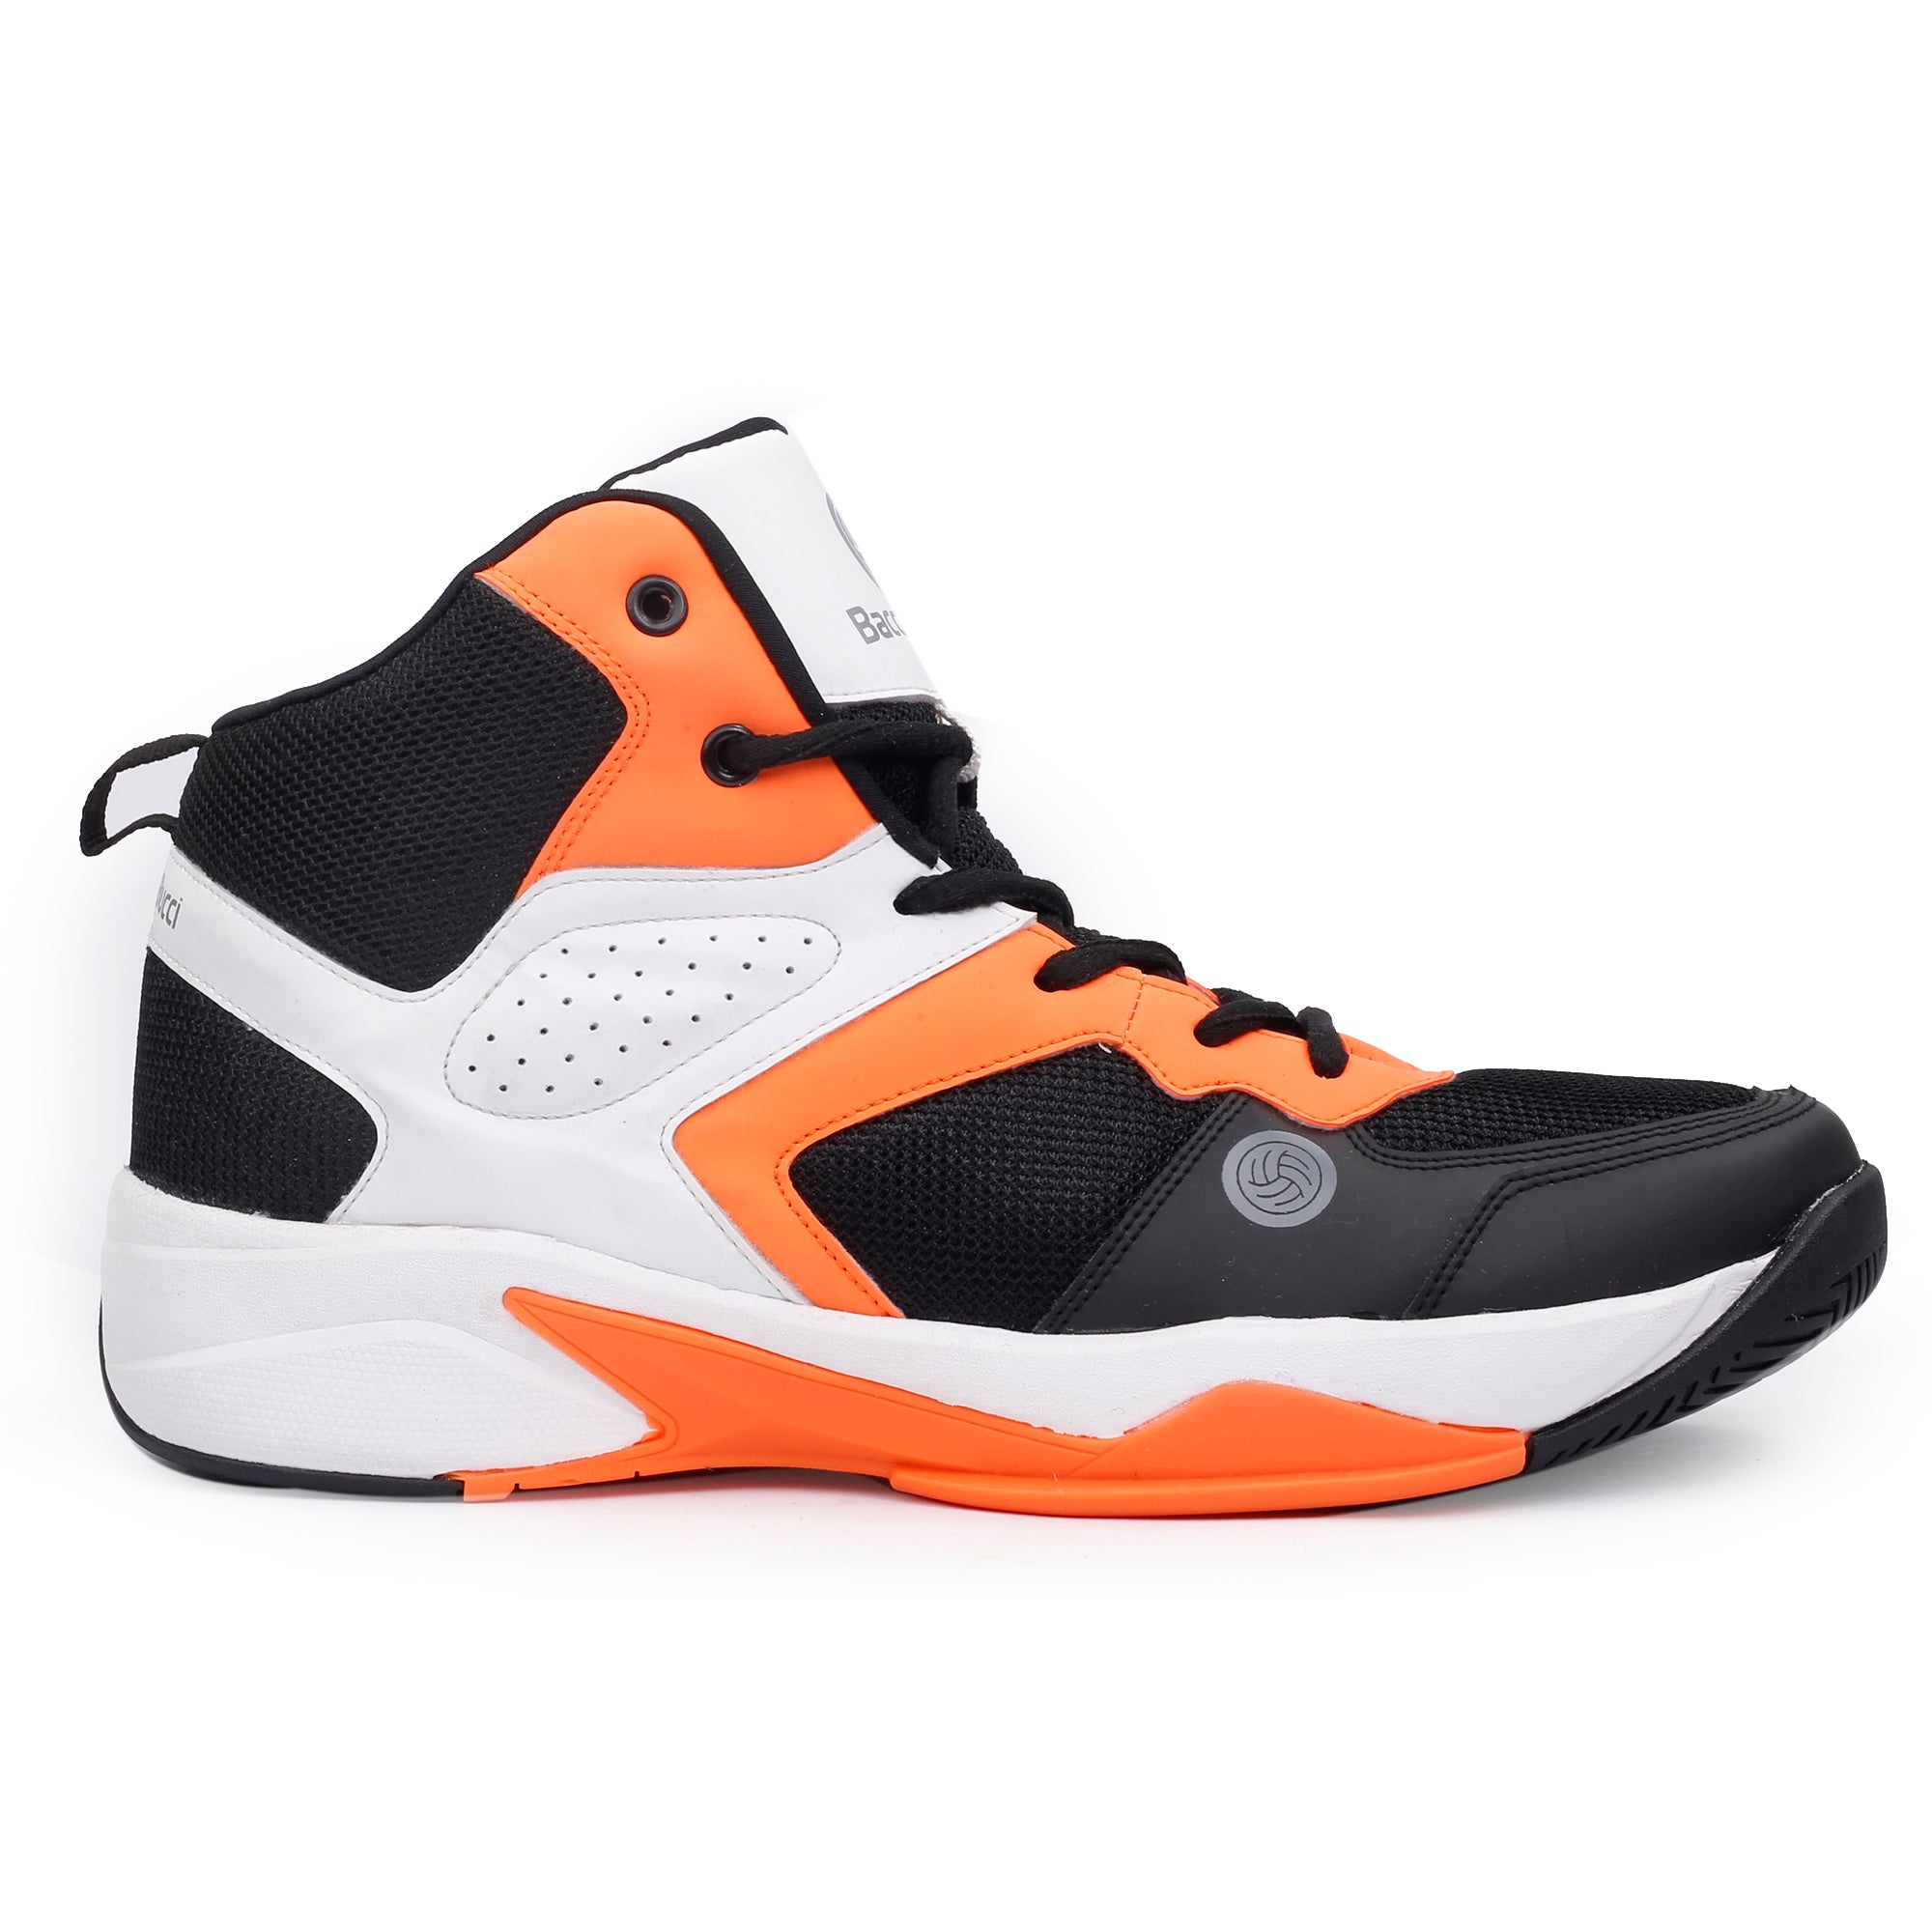 Bacca Bucci WAGER Basketball Shoes with Natural Rubber Sole & Breathable Upper | Bacca Bucci